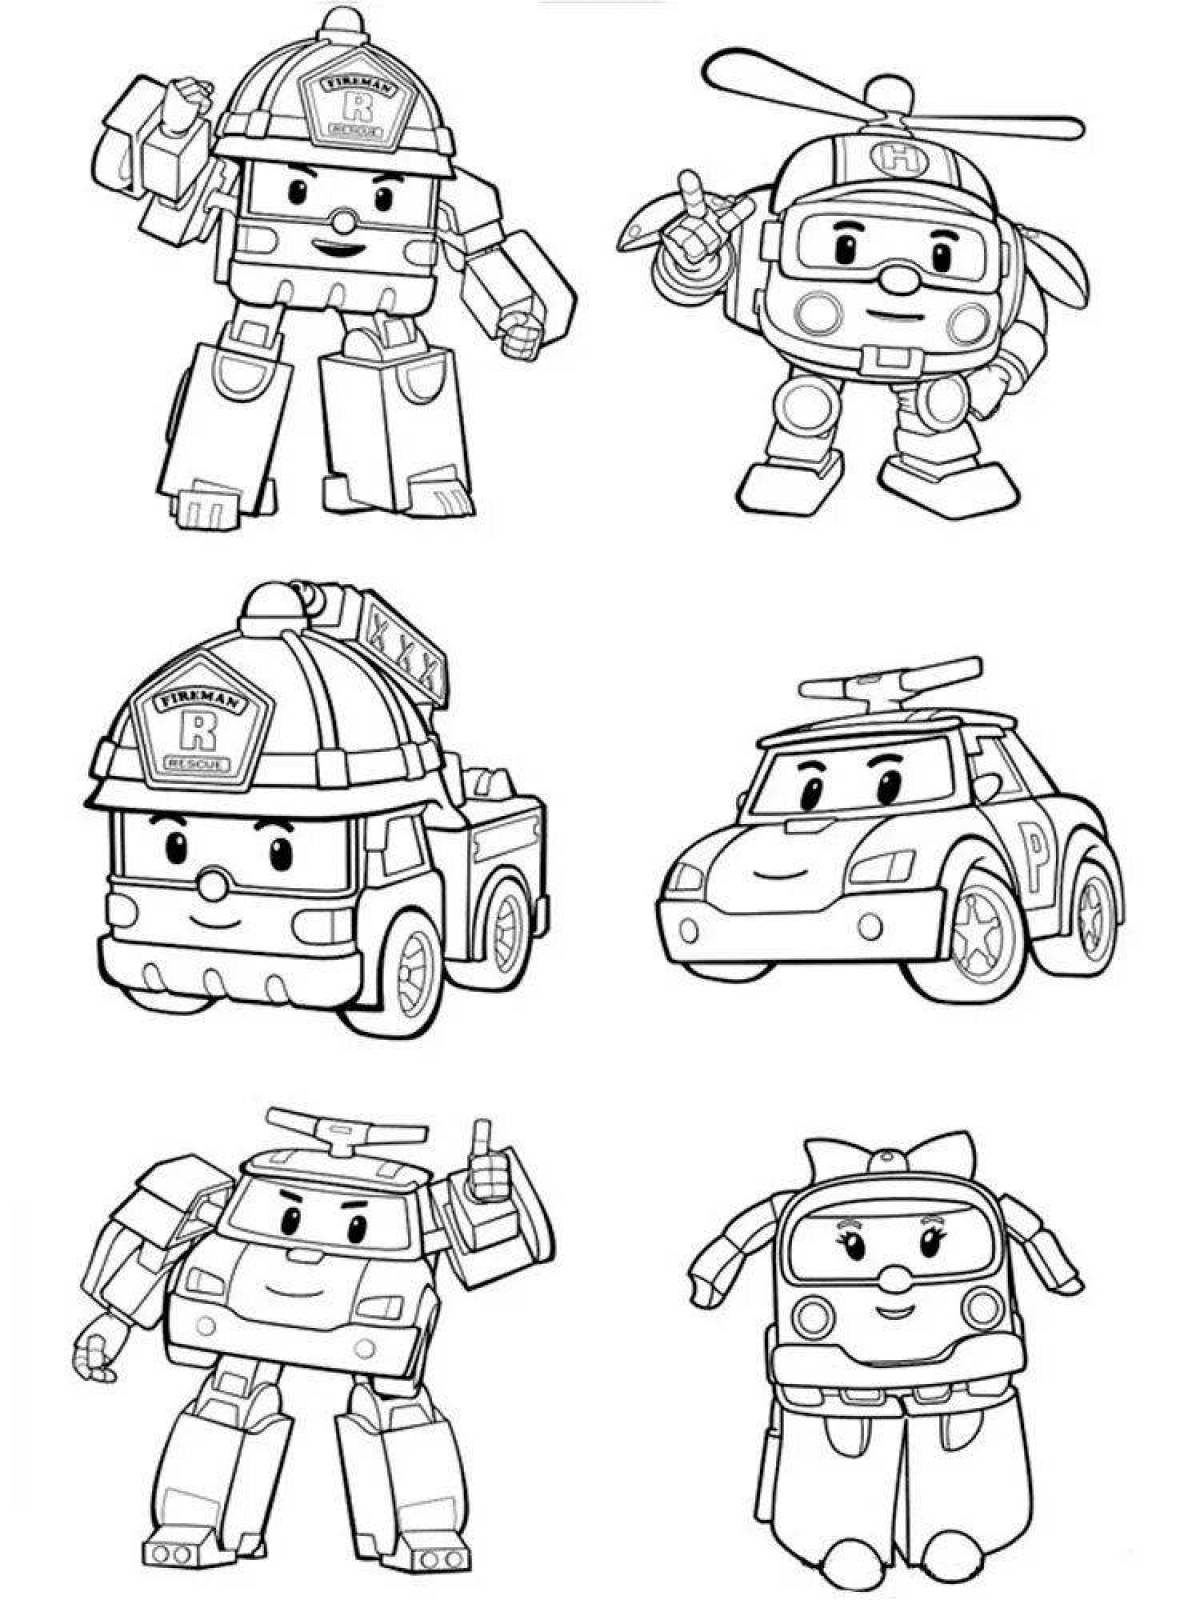 Crazy Poly robot coloring pages